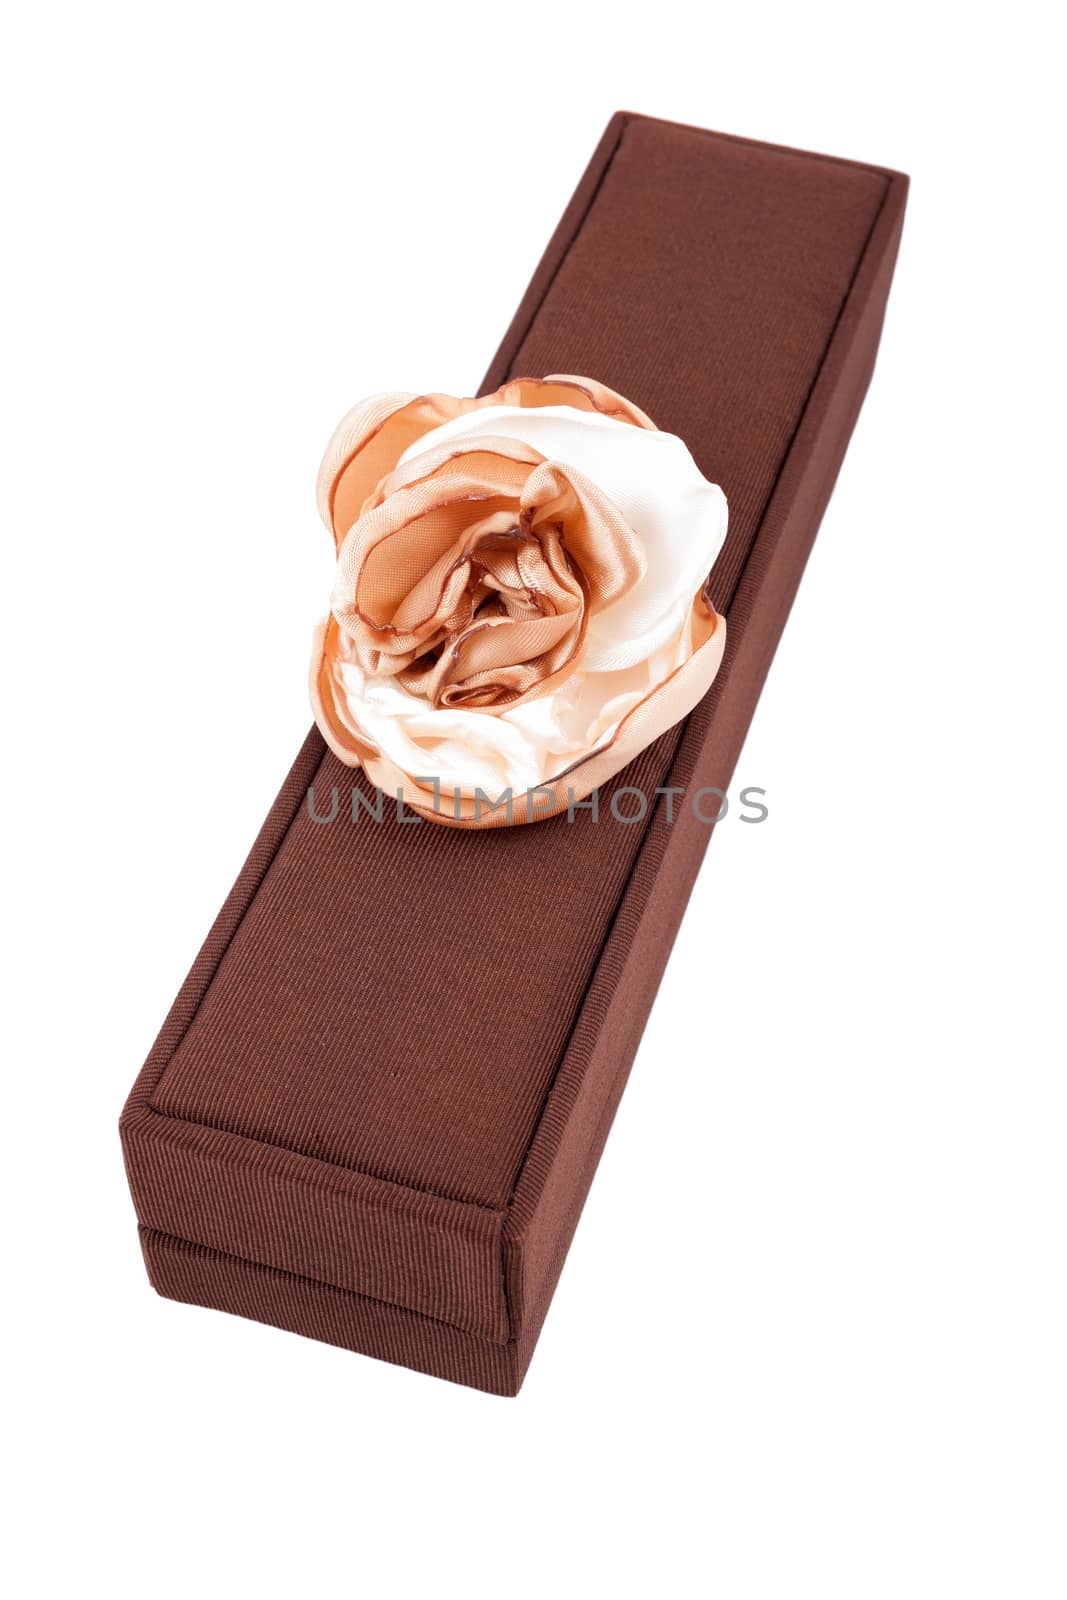 Luxury gift box in brown shades isolated over white background.